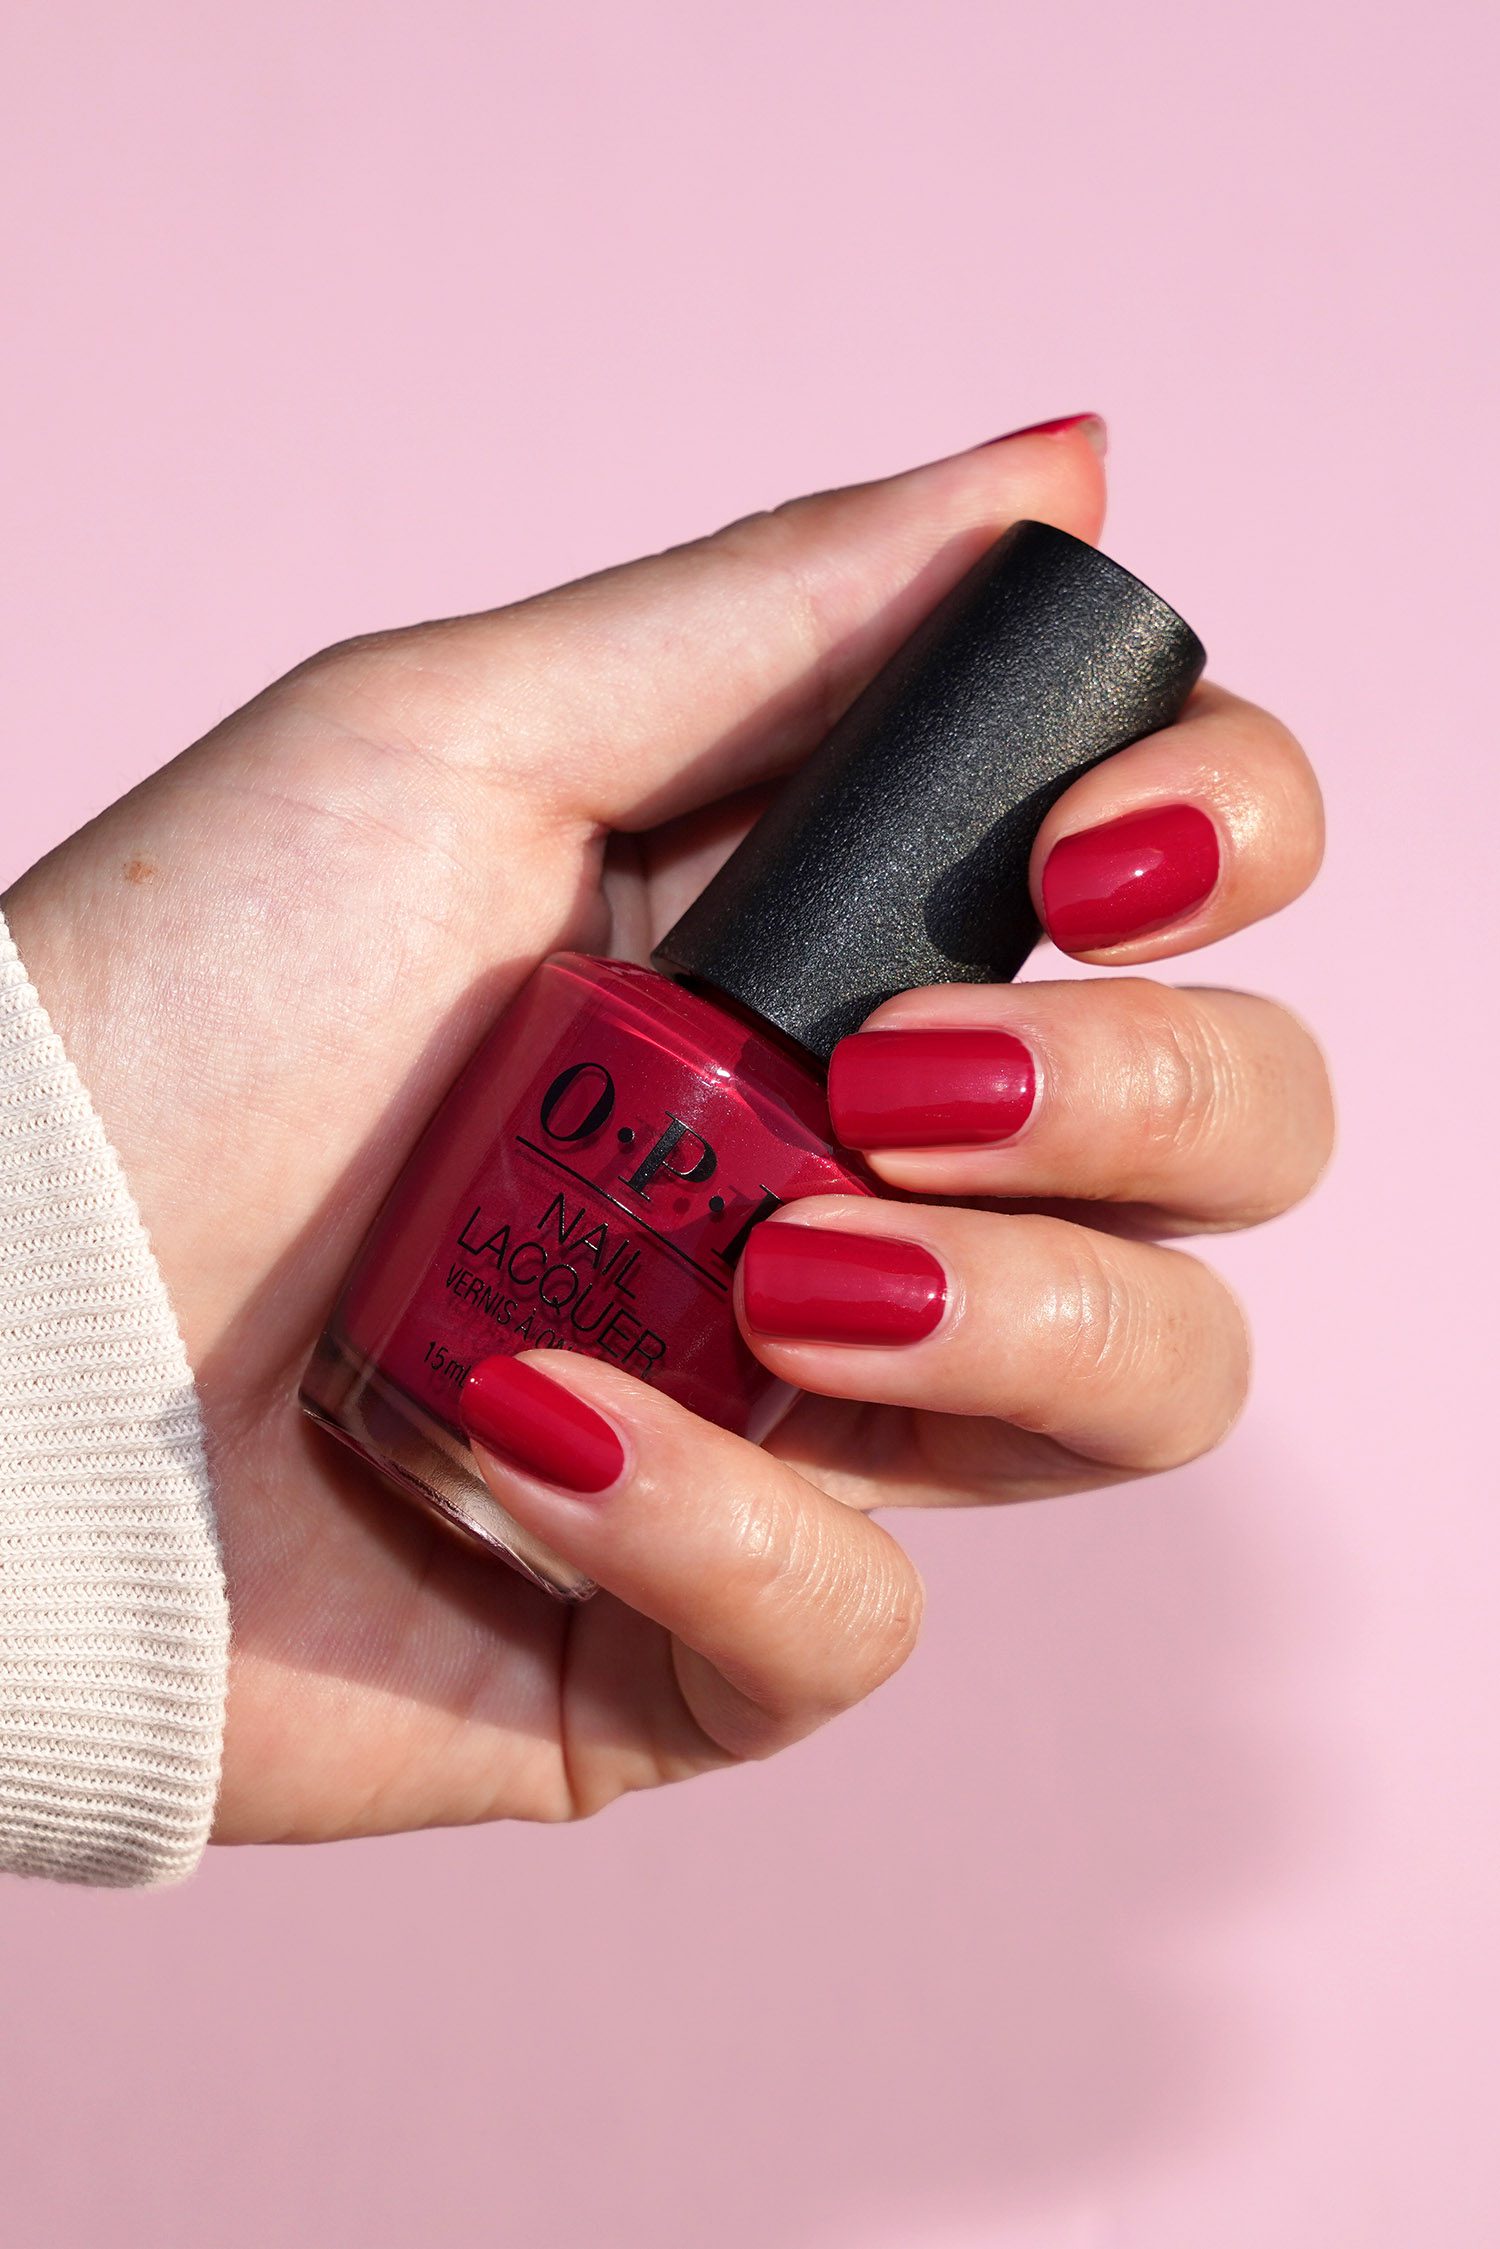 Nogen vare Alligevel Pink + Red Nail Polishes To Try for Valentine's Day - The Beauty Look Book